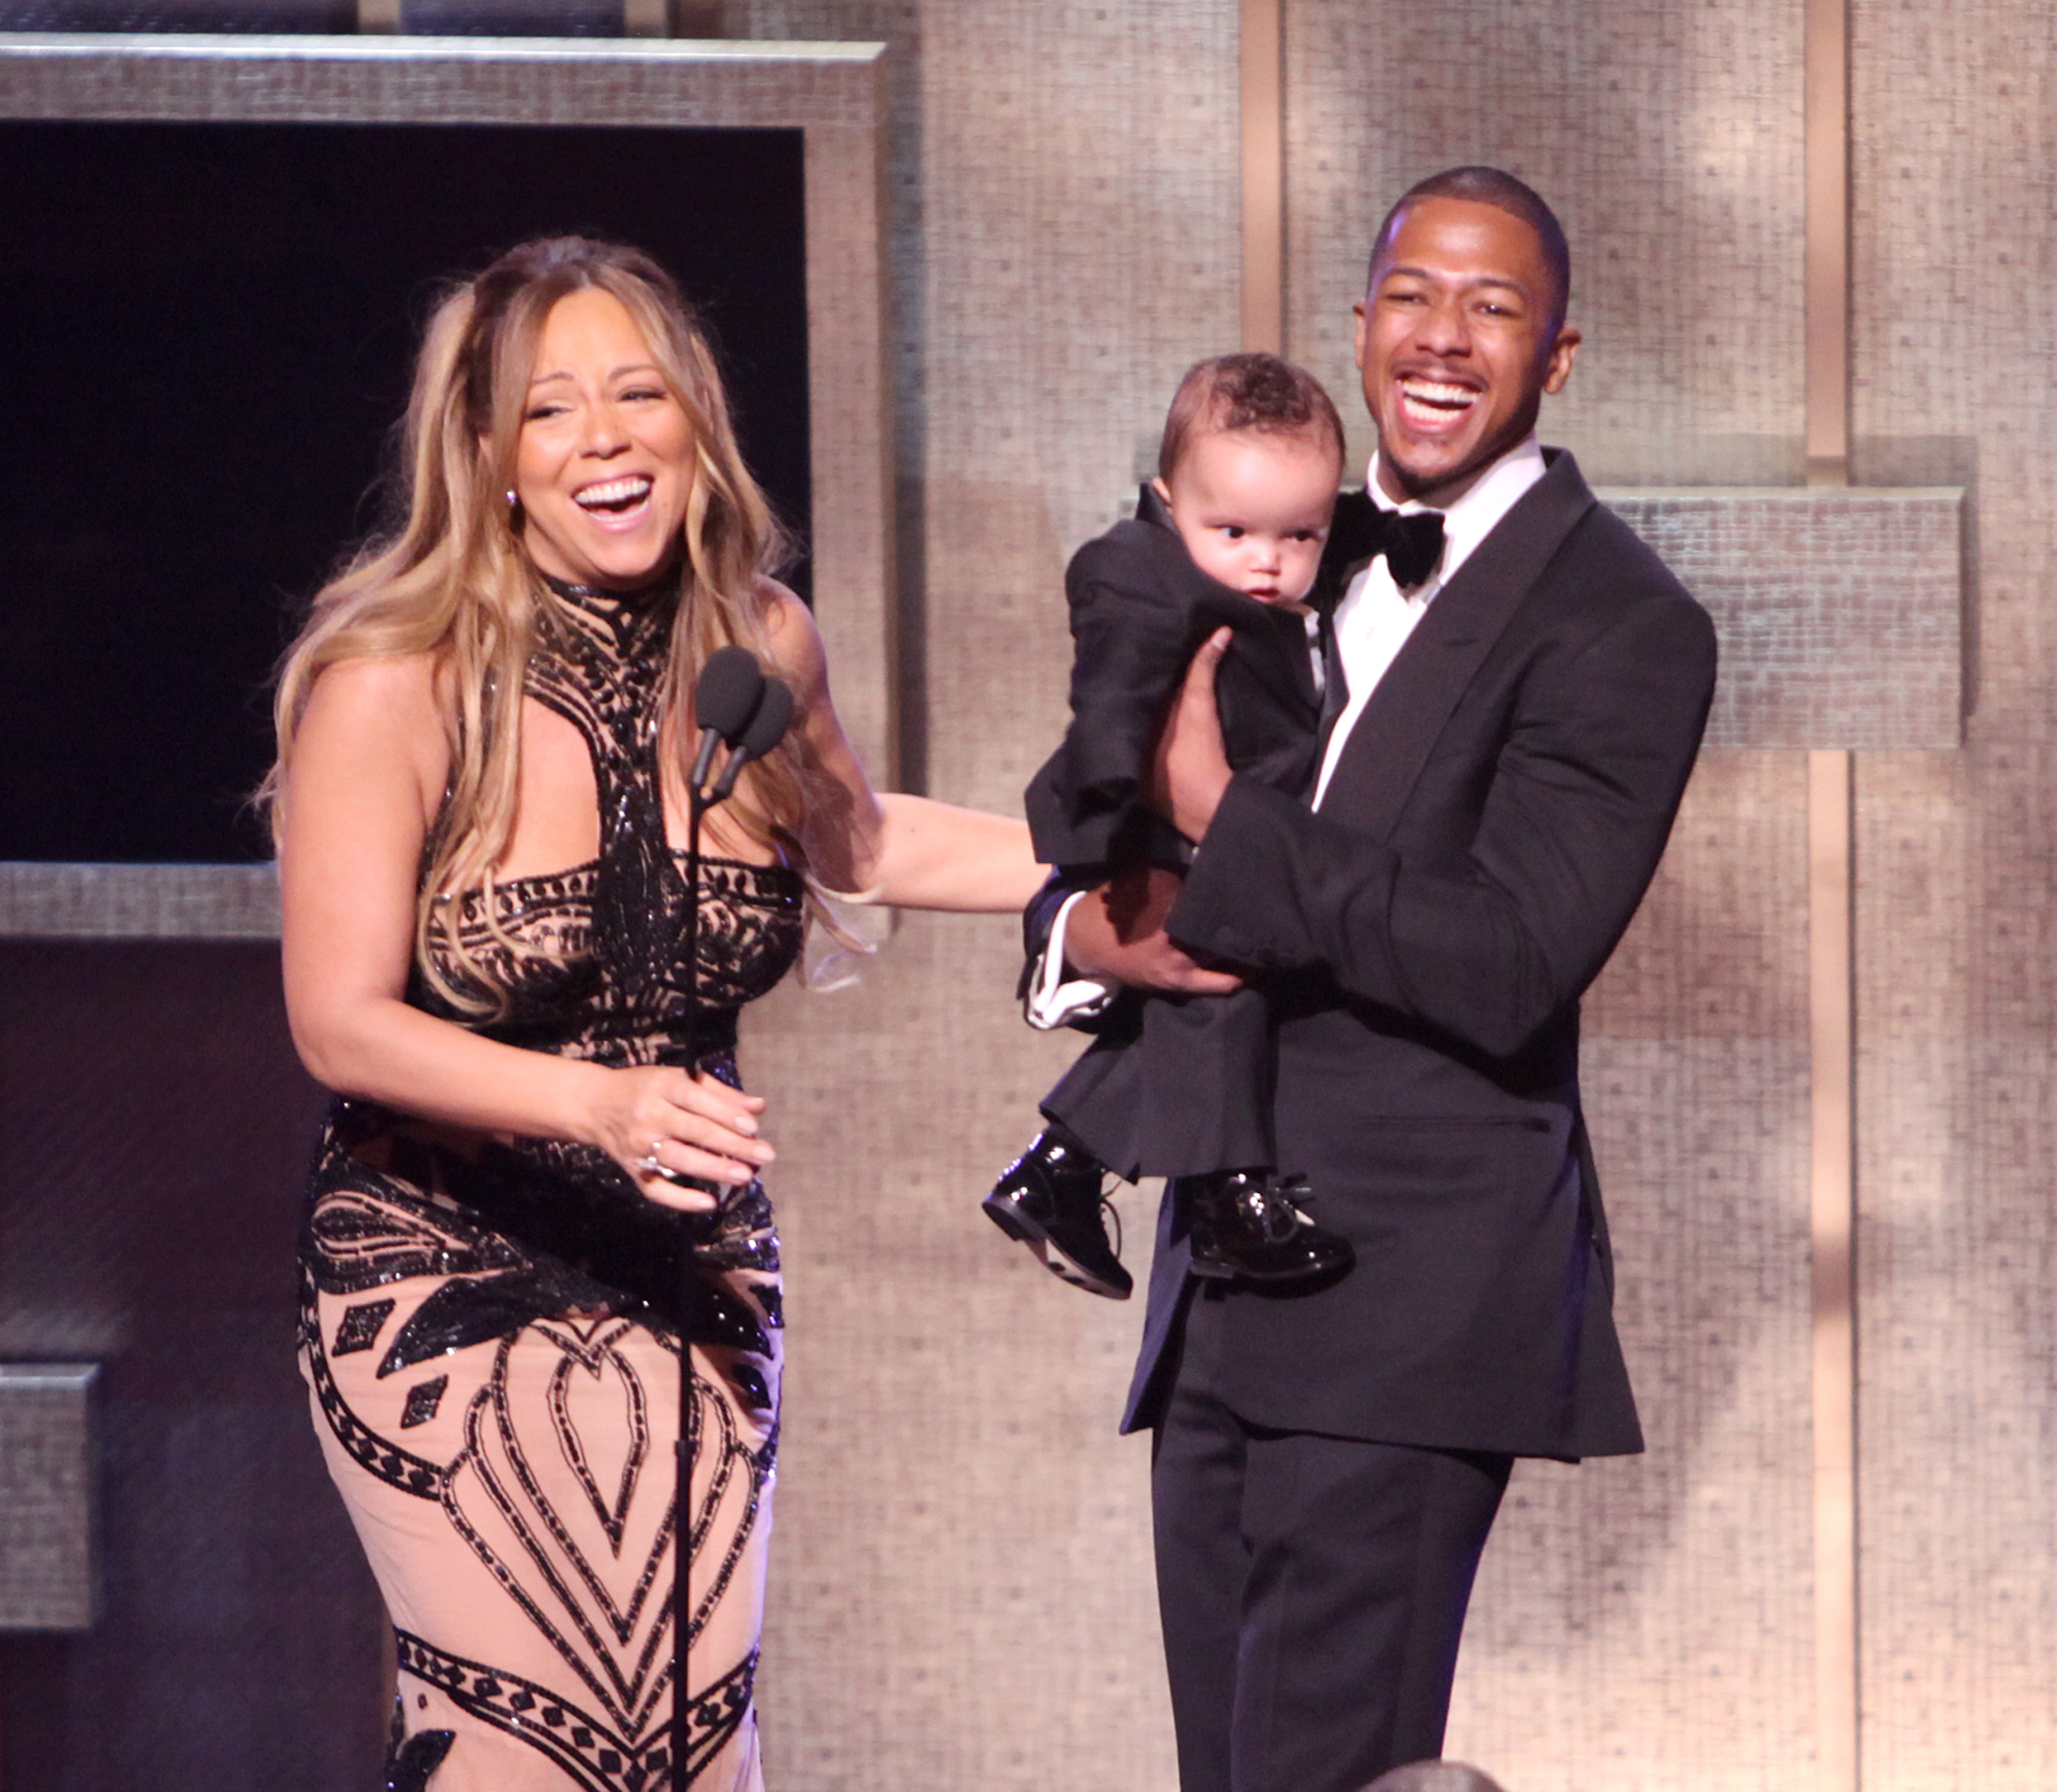 Mariah Carey and Nick Cannon with their son, Moroccan Scott Cannon at the BET Awards in 2012 | Source: Getty Images